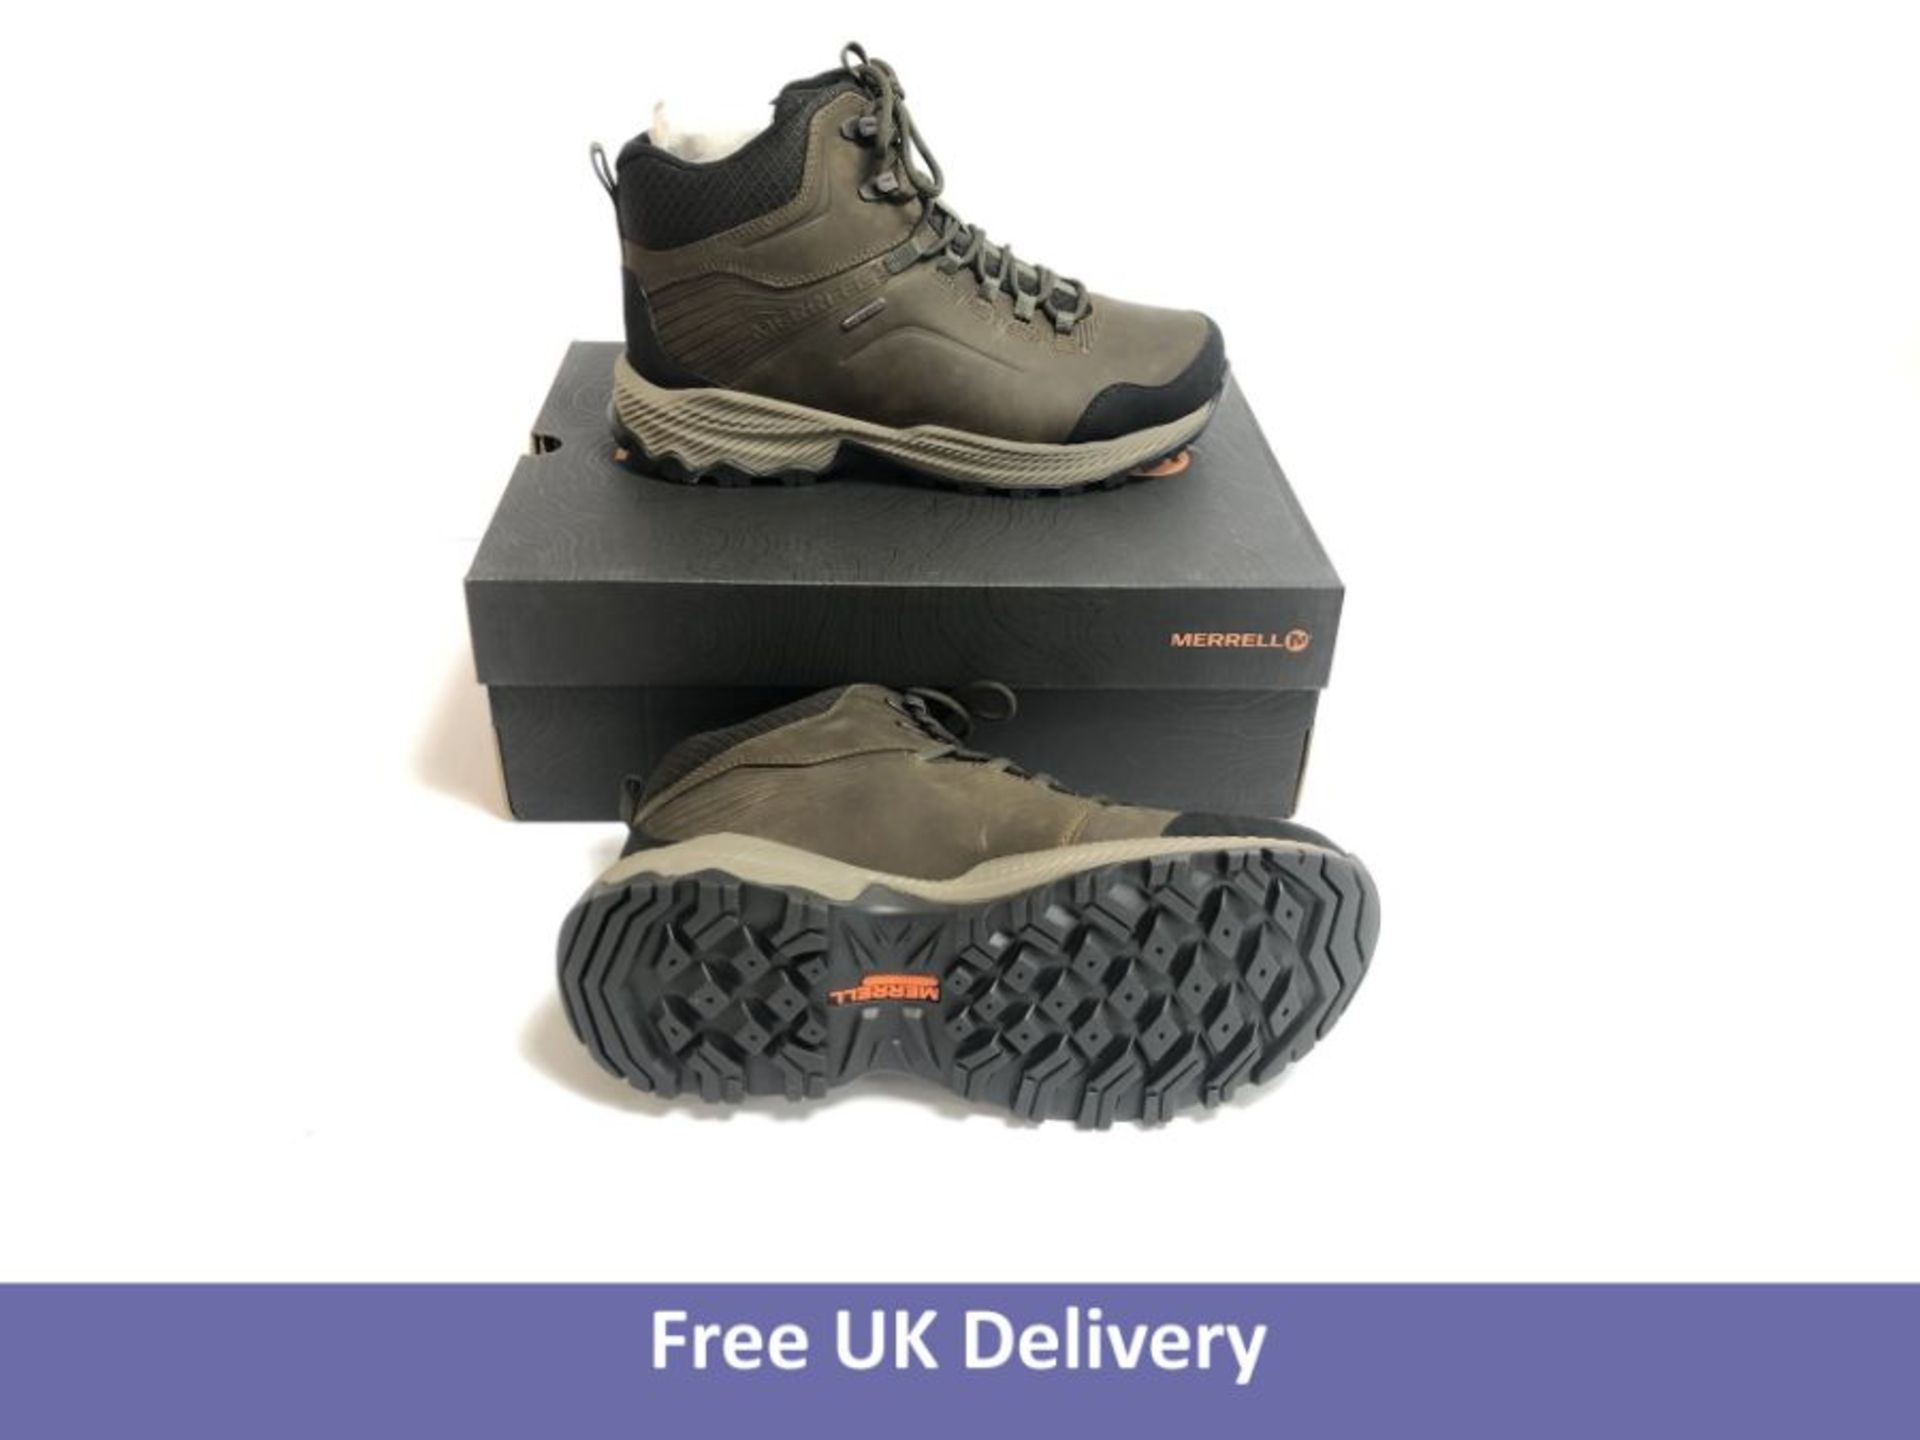 Merrell Women's Forestbound Hiking Boots, UK 8.5